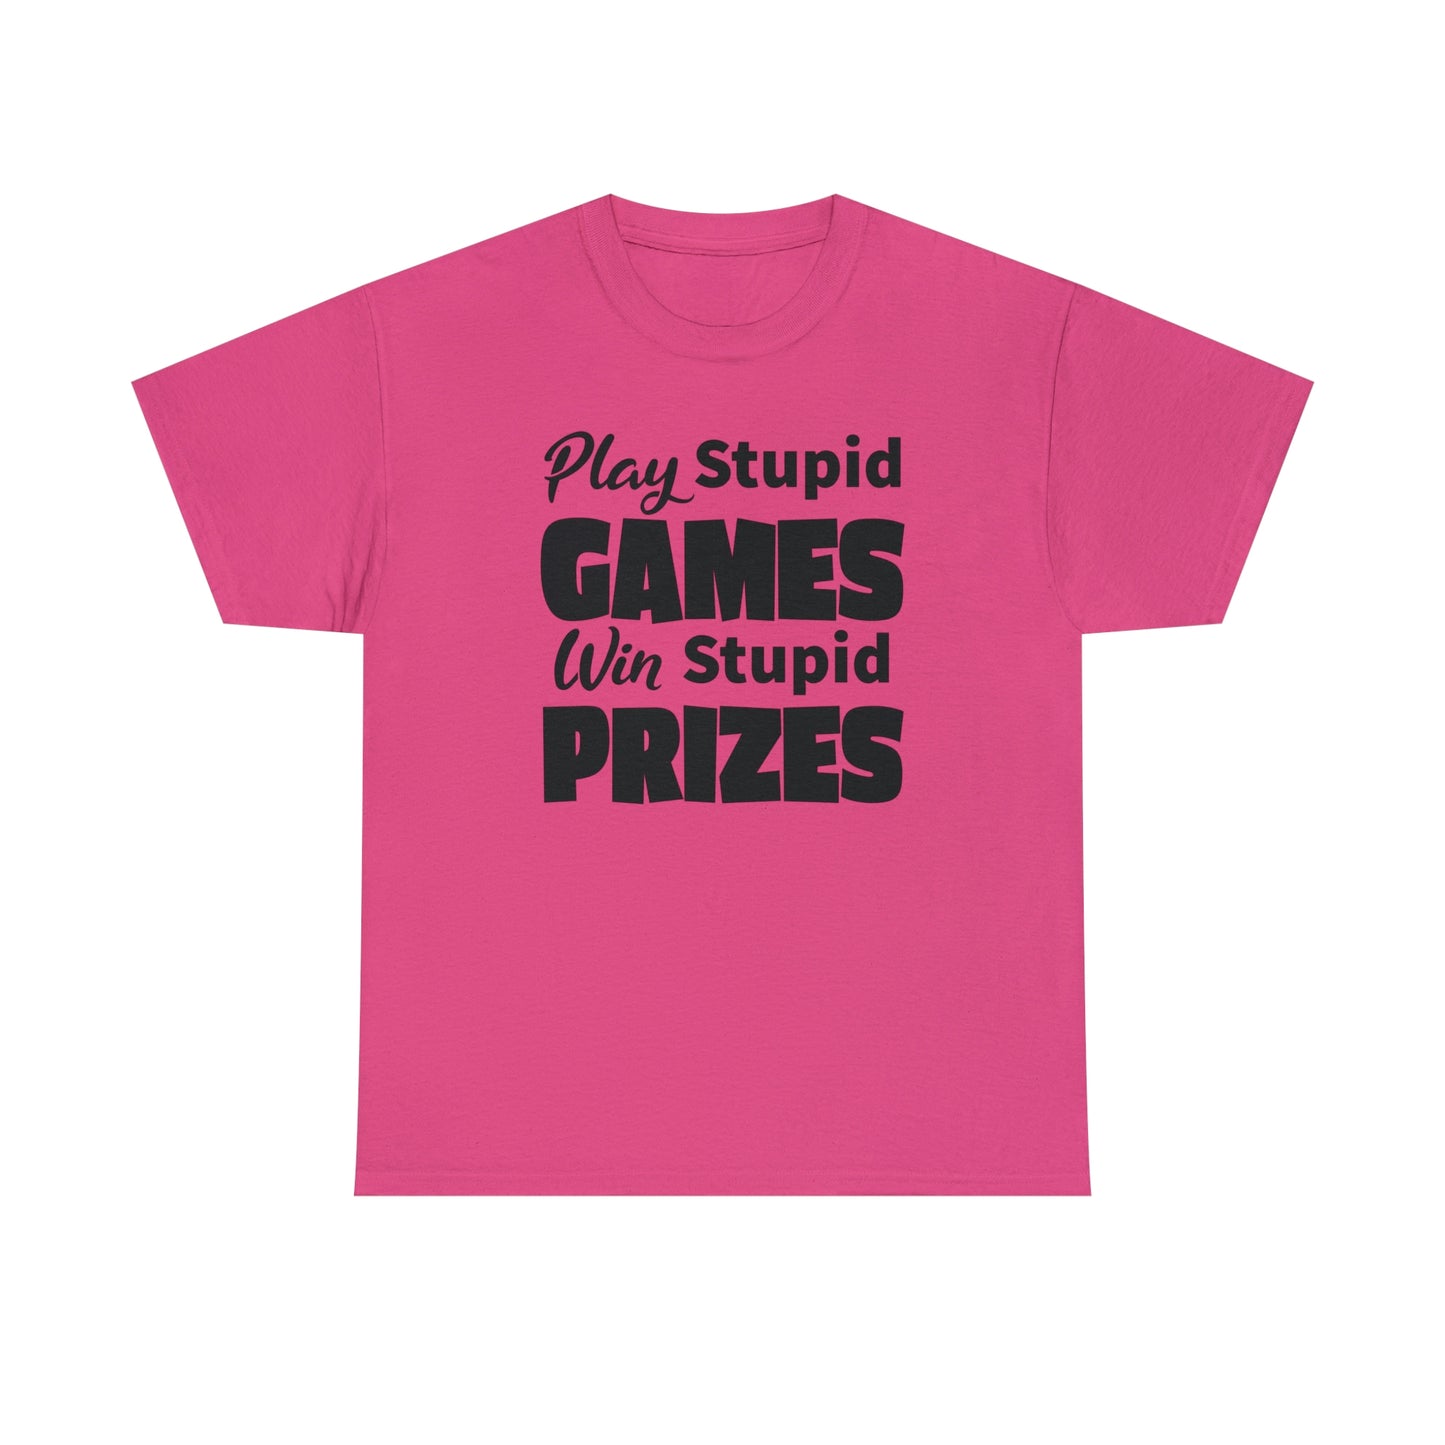 Sarcastic TShirt For Stupid Games T-Shirt For Stupid Prizes T Shirt For Funny Games Shirt For Fun Gift Shirt For Games Tee